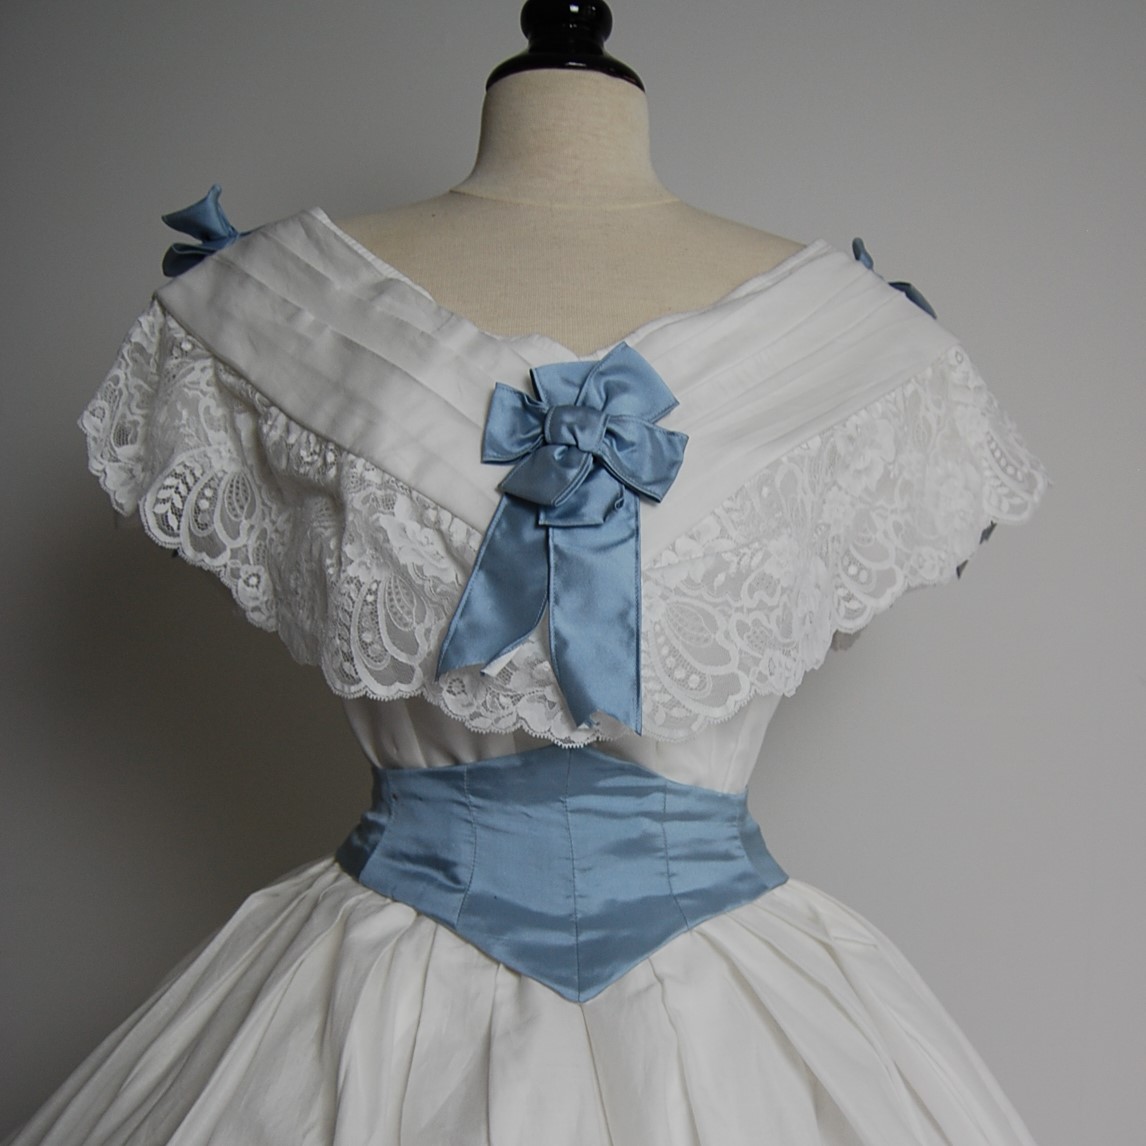 1860 ball gown